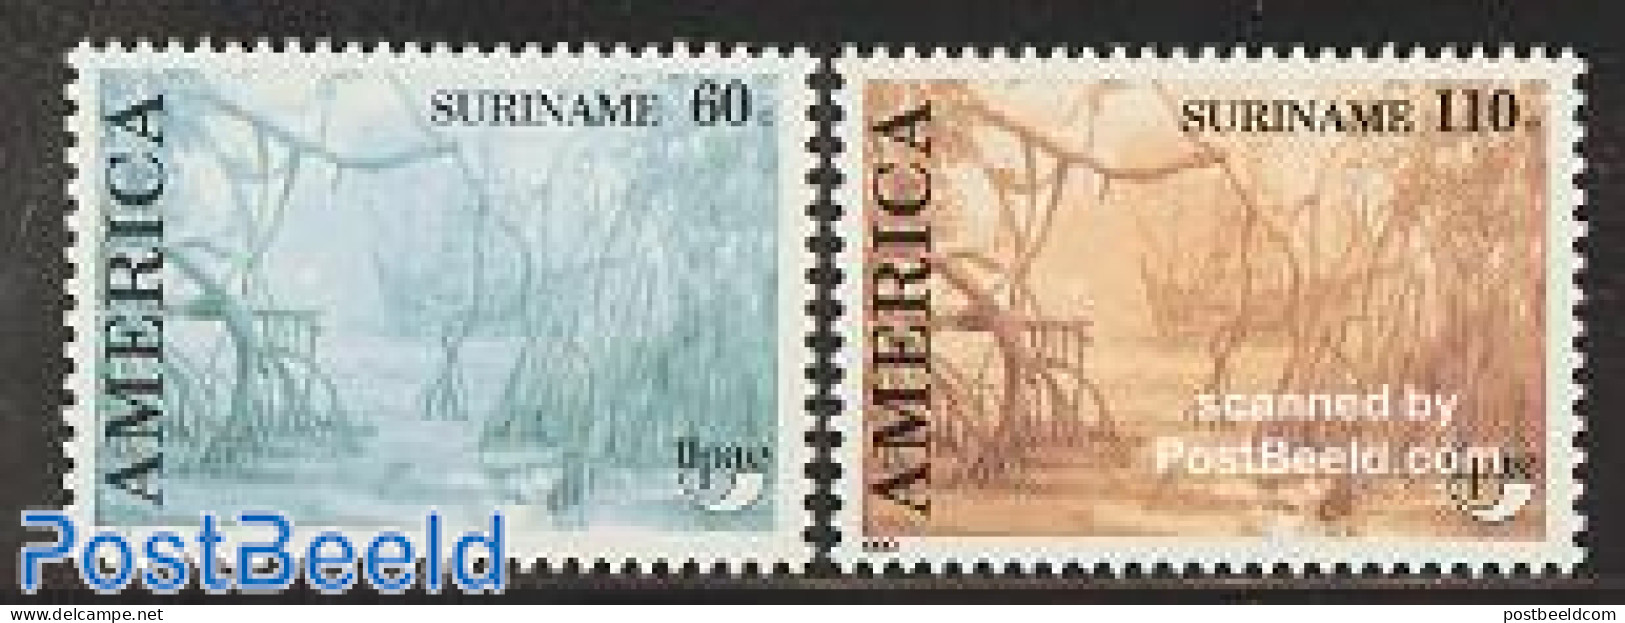 Suriname, Republic 1990 UPAE 2v, Mint NH, Nature - Transport - Trees & Forests - U.P.A.E. - Ships And Boats - Rotary, Lions Club